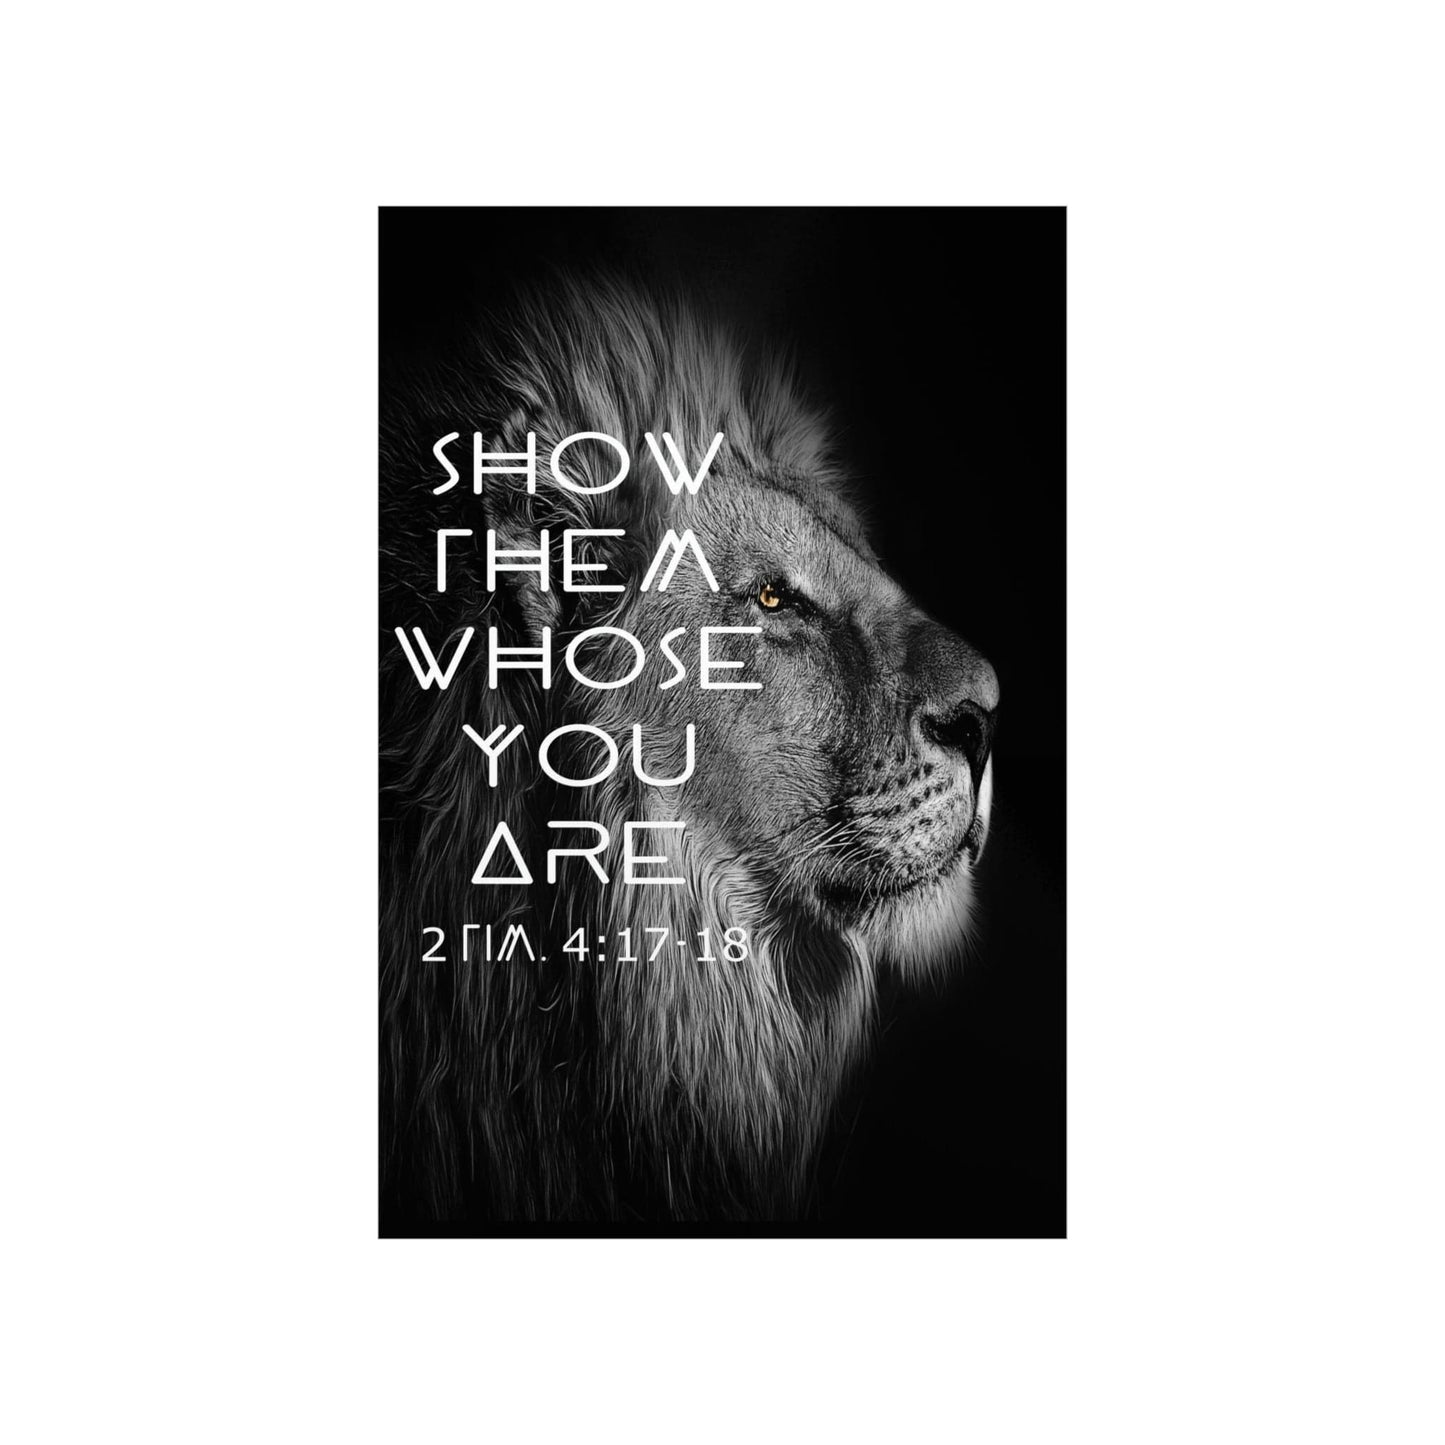 Printify Poster Show Them Whose You Are - 2 Tim. 4:17,18 Premium Christian Bible Verse Poster